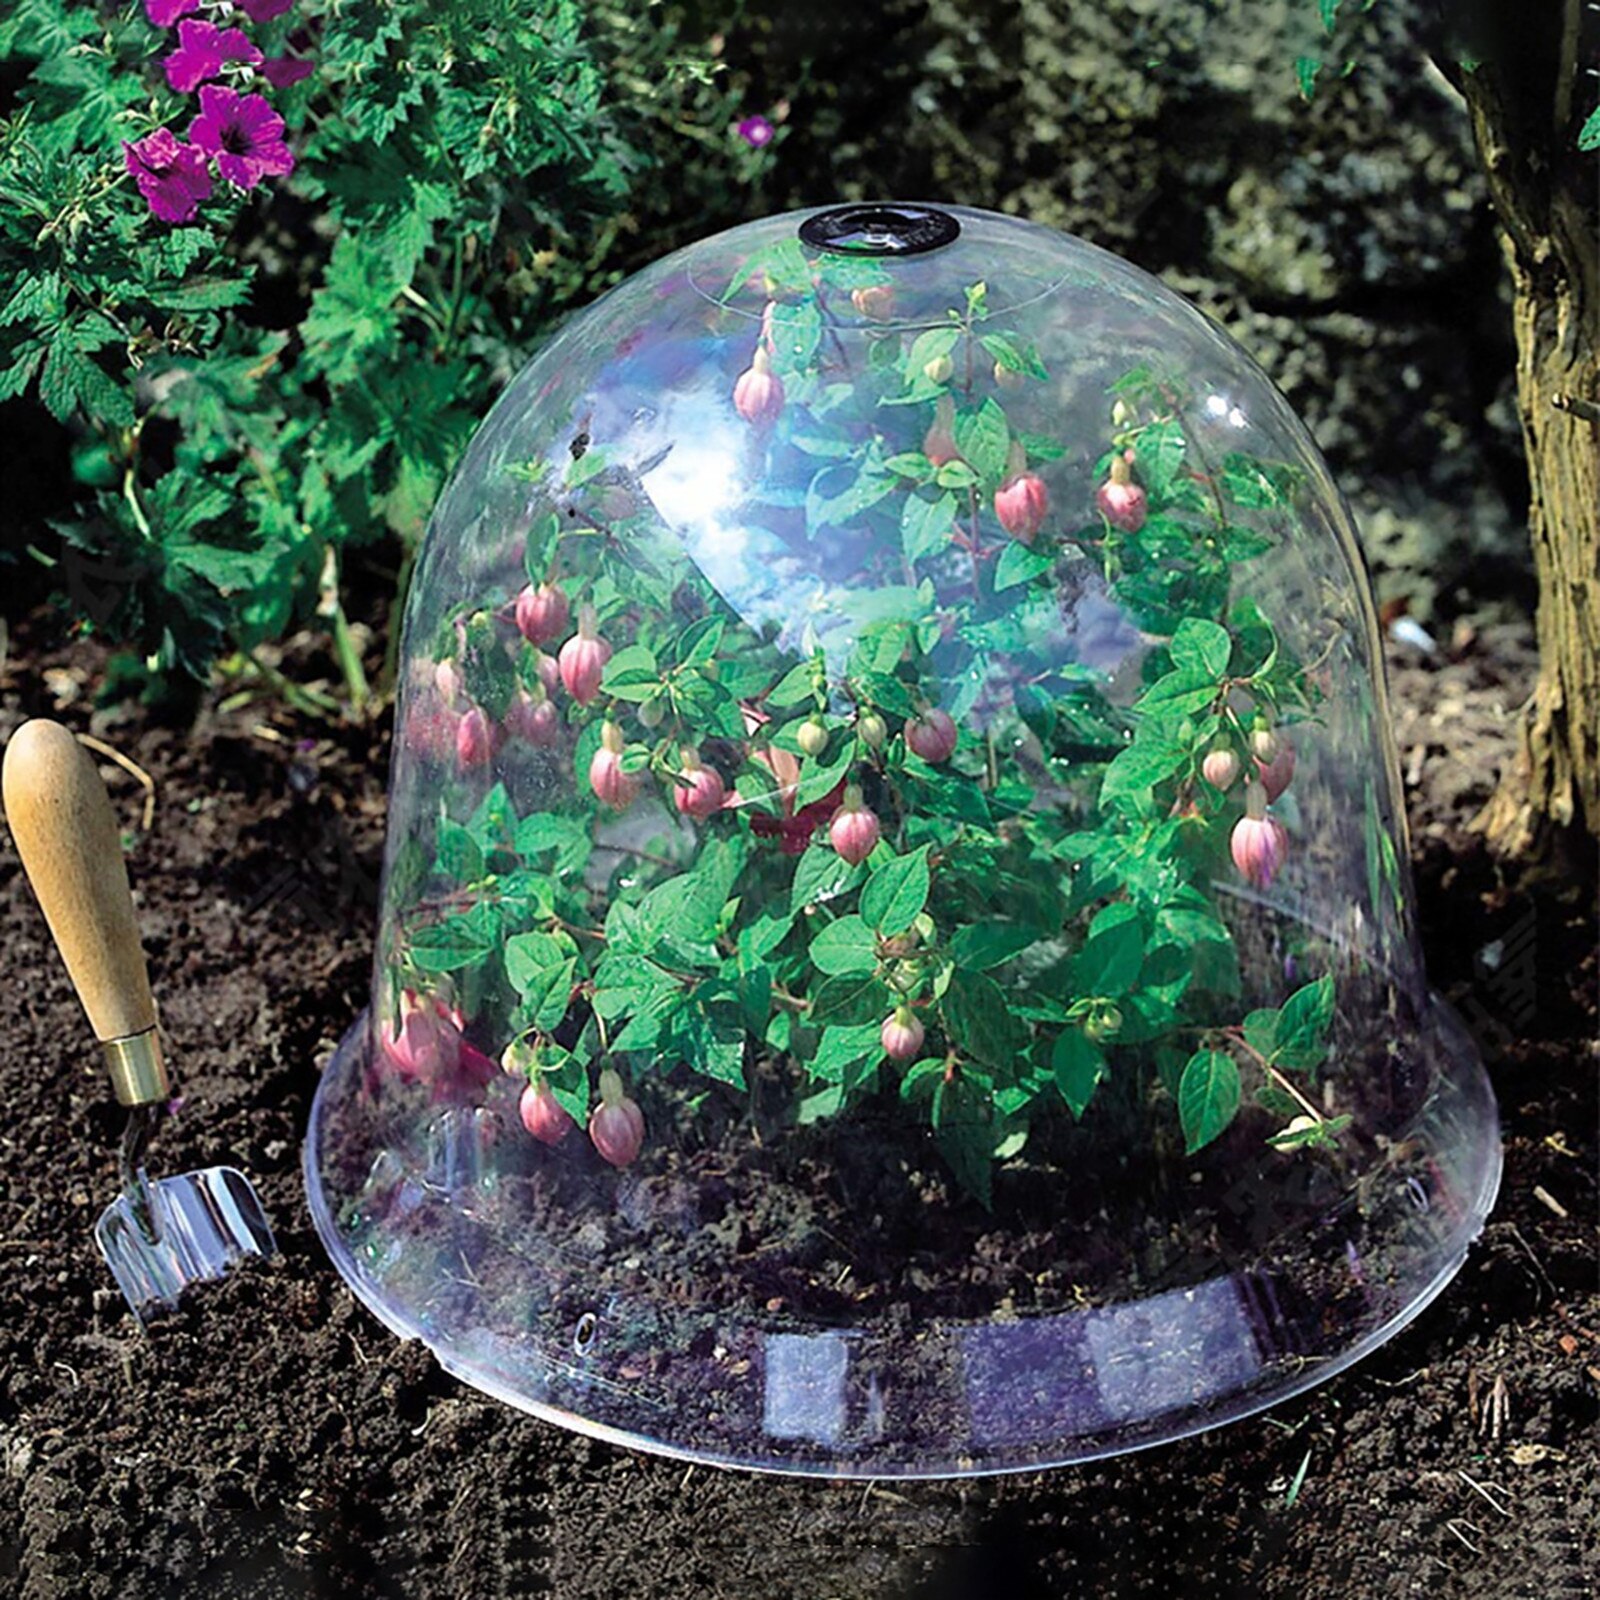 40 # Tuin Cloche Dome Plant Bell Protector Cover Plastic Voor Plant Bescherming Plastic Freeze Koude Plant Bescherming Tuin Deksels